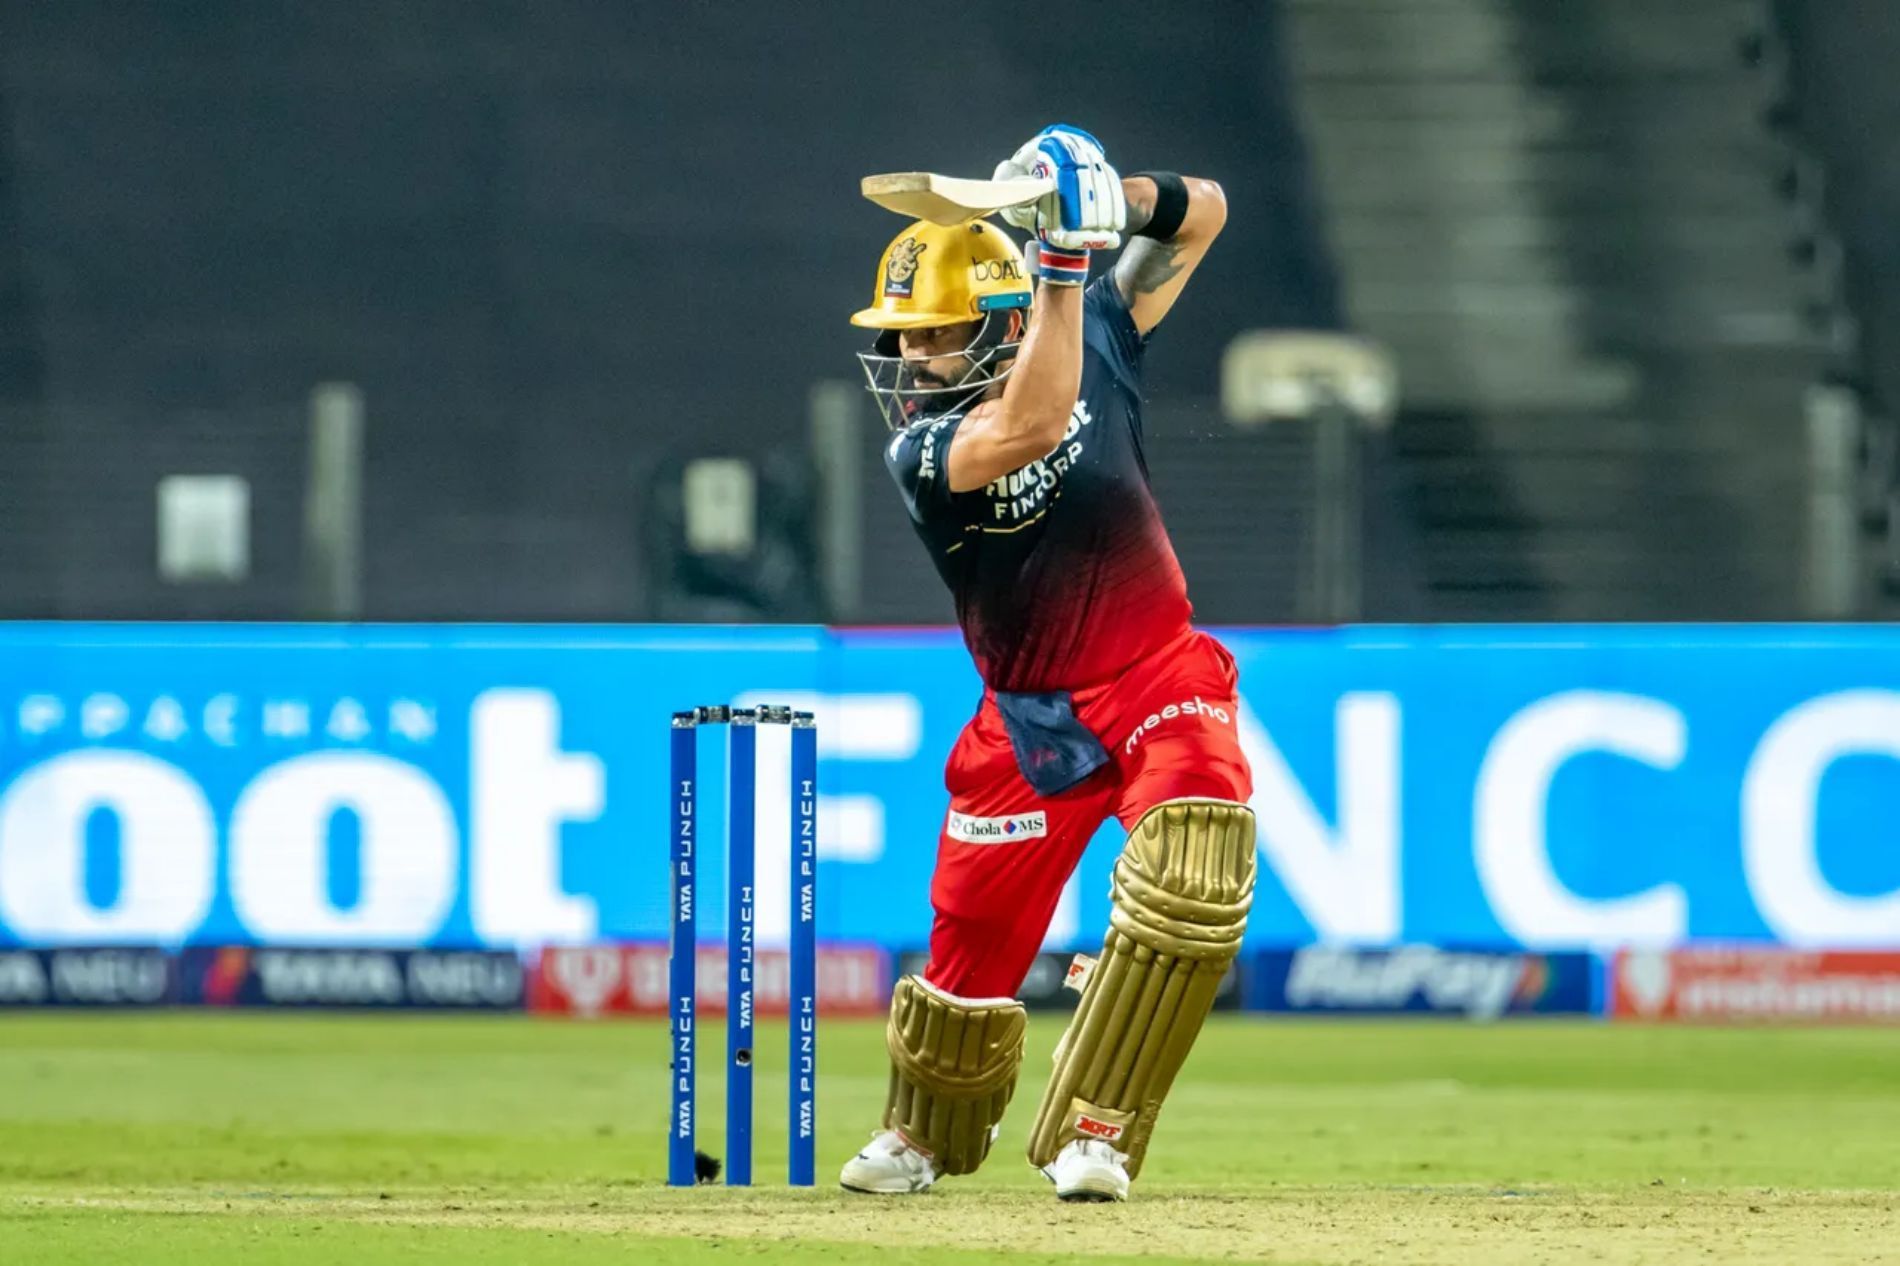 Virat Kohli has been dismissed without scoring in the last two matches. Pic: IPLT20.COM